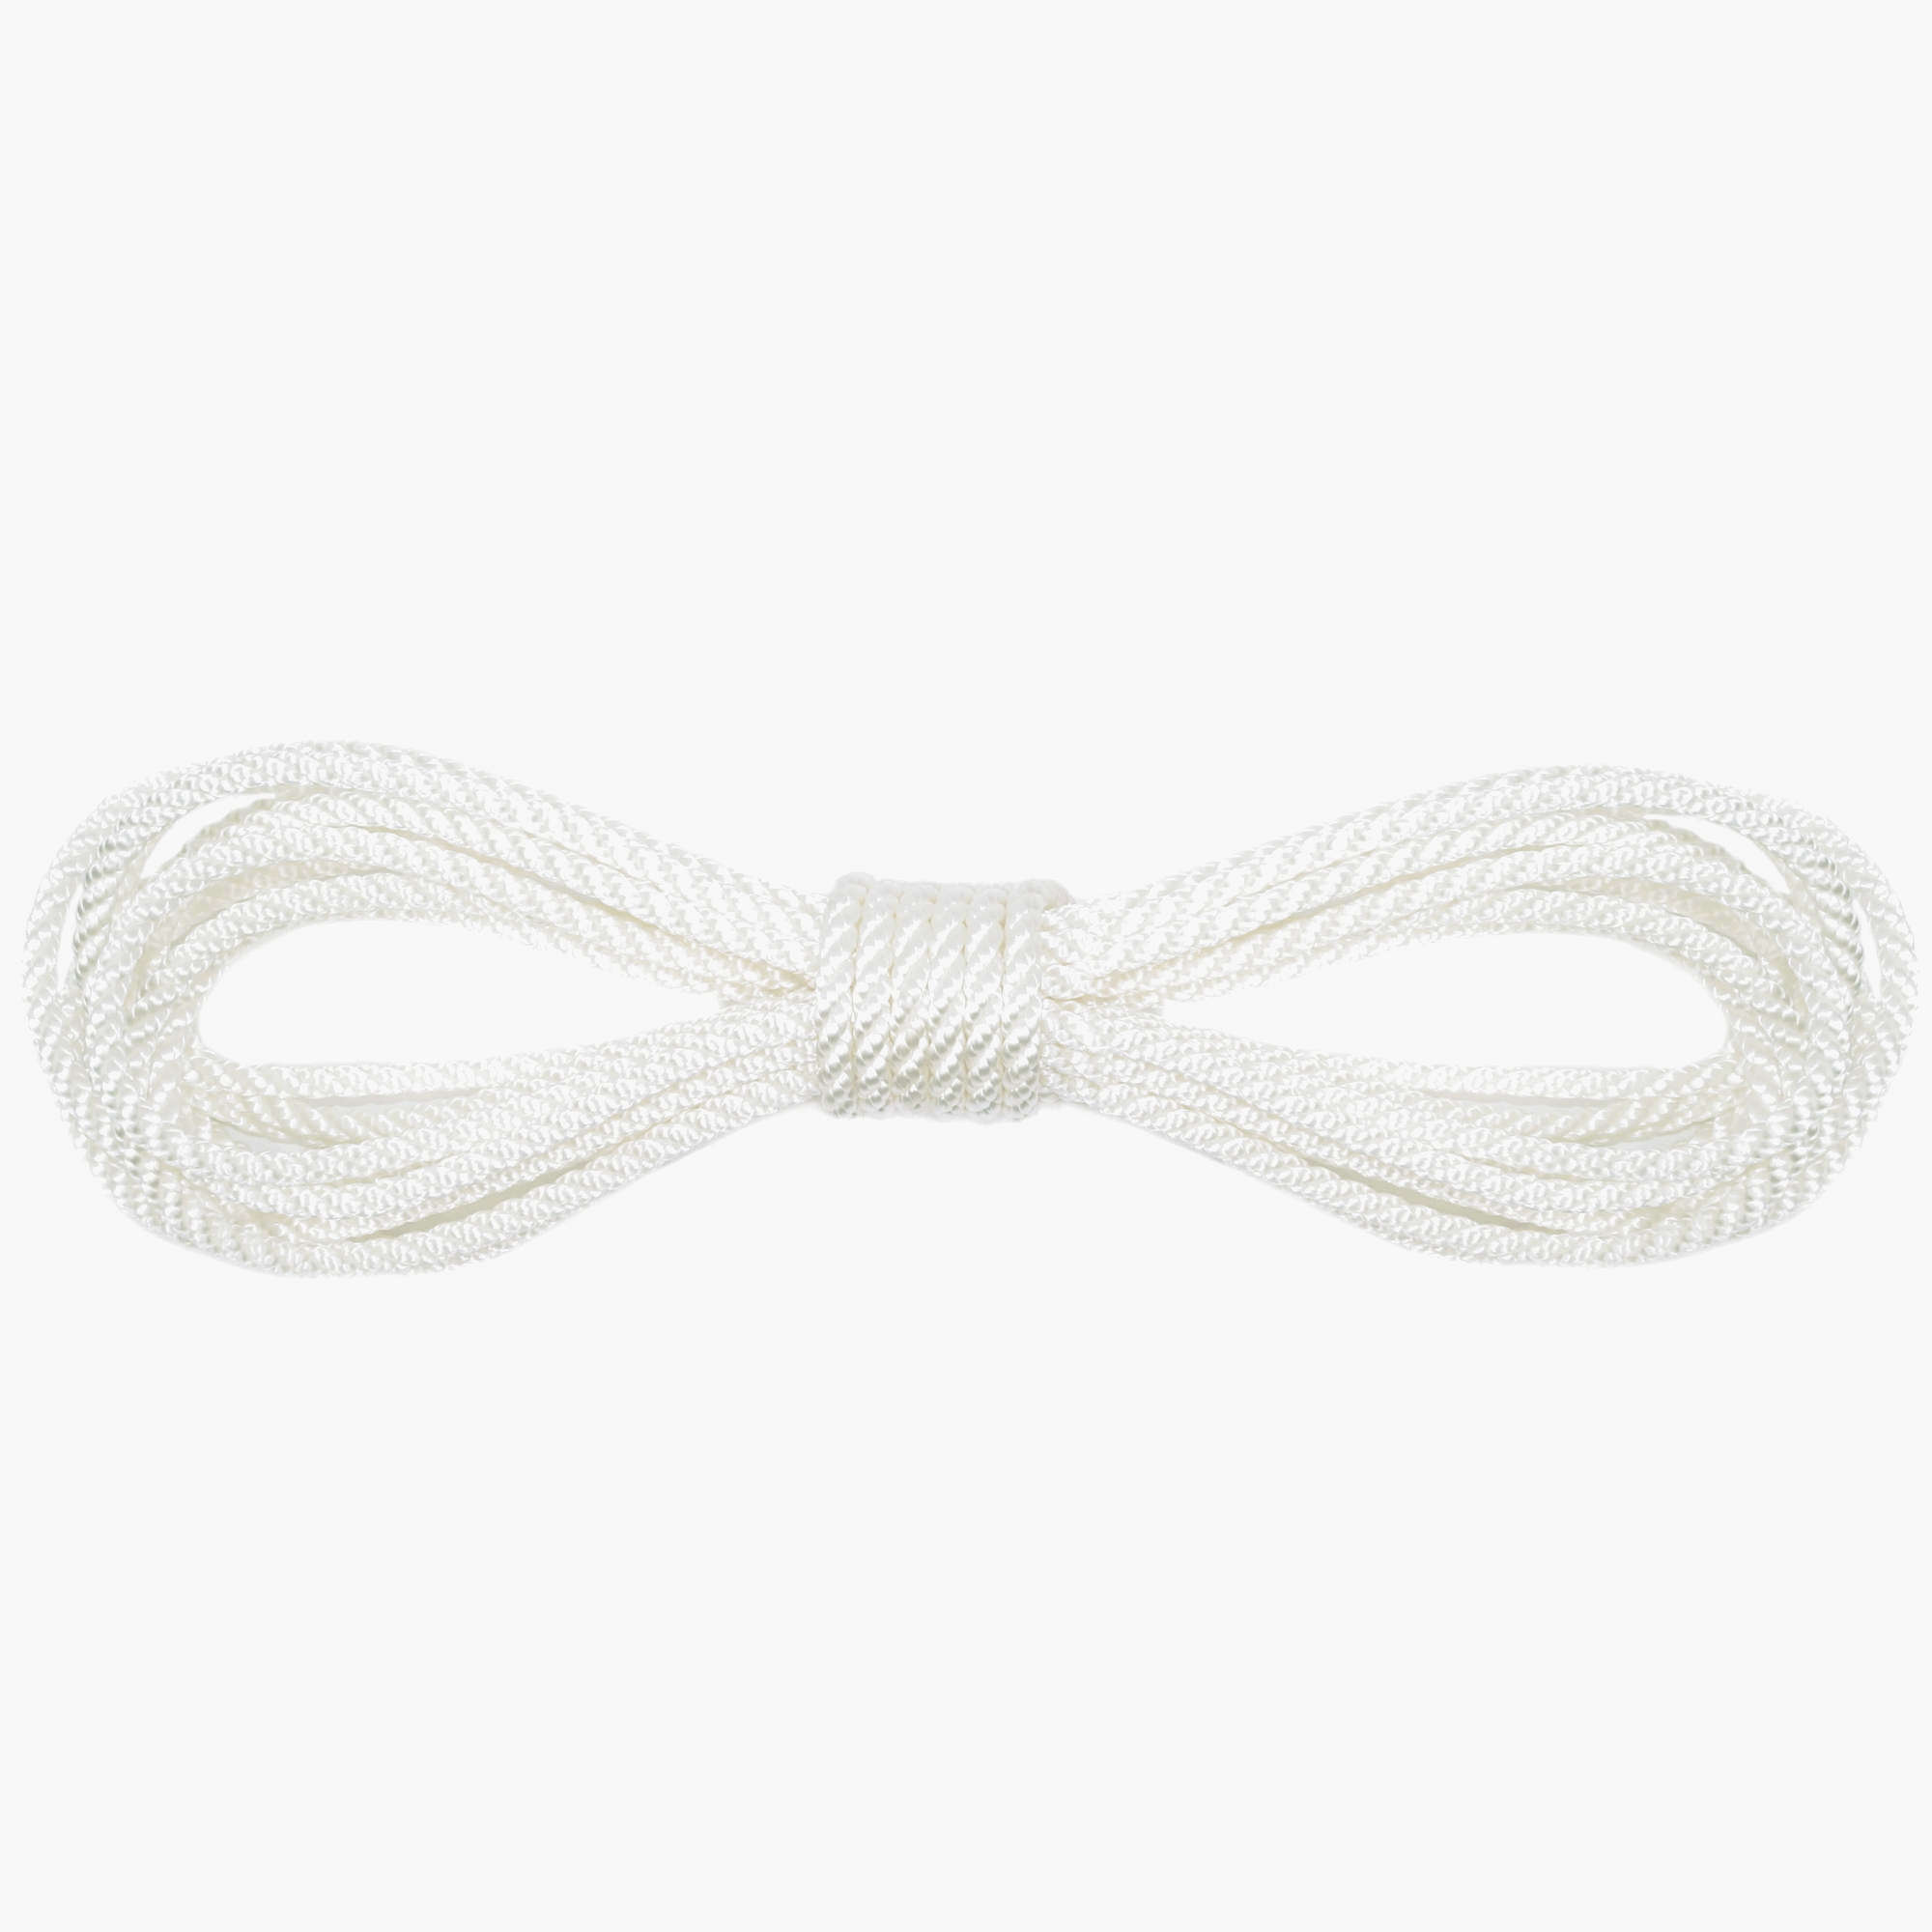 12mm 3 Strand Nylon Marine Rope  Lomo Watersport UK. Wetsuits, Dry Bags &  Outdoor Gear.